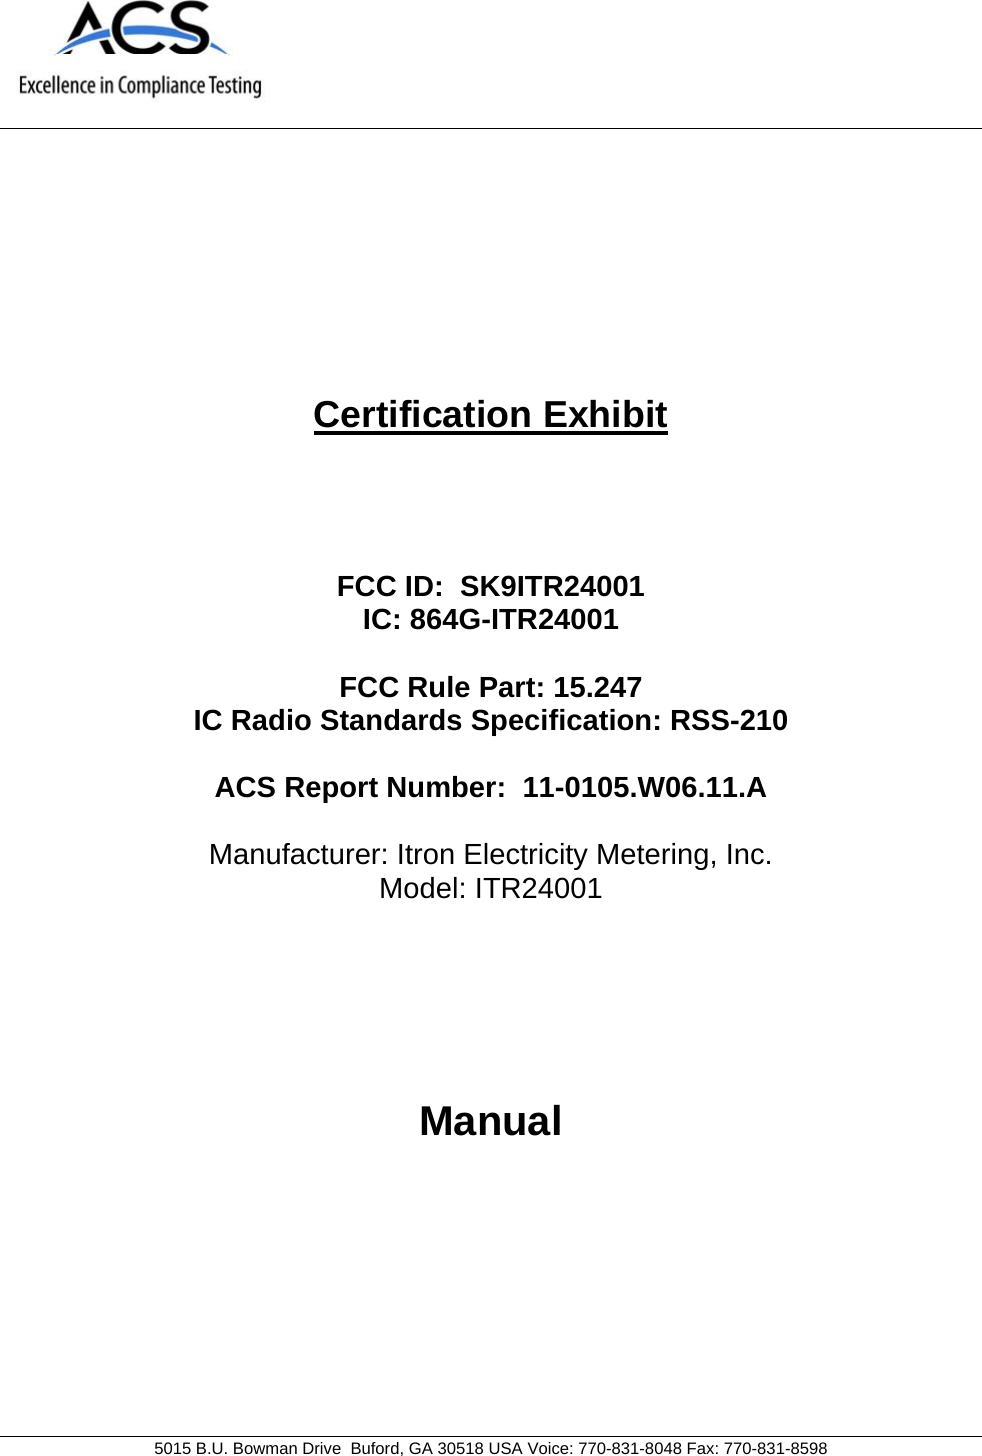     5015 B.U. Bowman Drive  Buford, GA 30518 USA Voice: 770-831-8048 Fax: 770-831-8598   Certification Exhibit     FCC ID:  SK9ITR24001 IC: 864G-ITR24001  FCC Rule Part: 15.247 IC Radio Standards Specification: RSS-210  ACS Report Number:  11-0105.W06.11.A   Manufacturer: Itron Electricity Metering, Inc. Model: ITR24001     Manual  